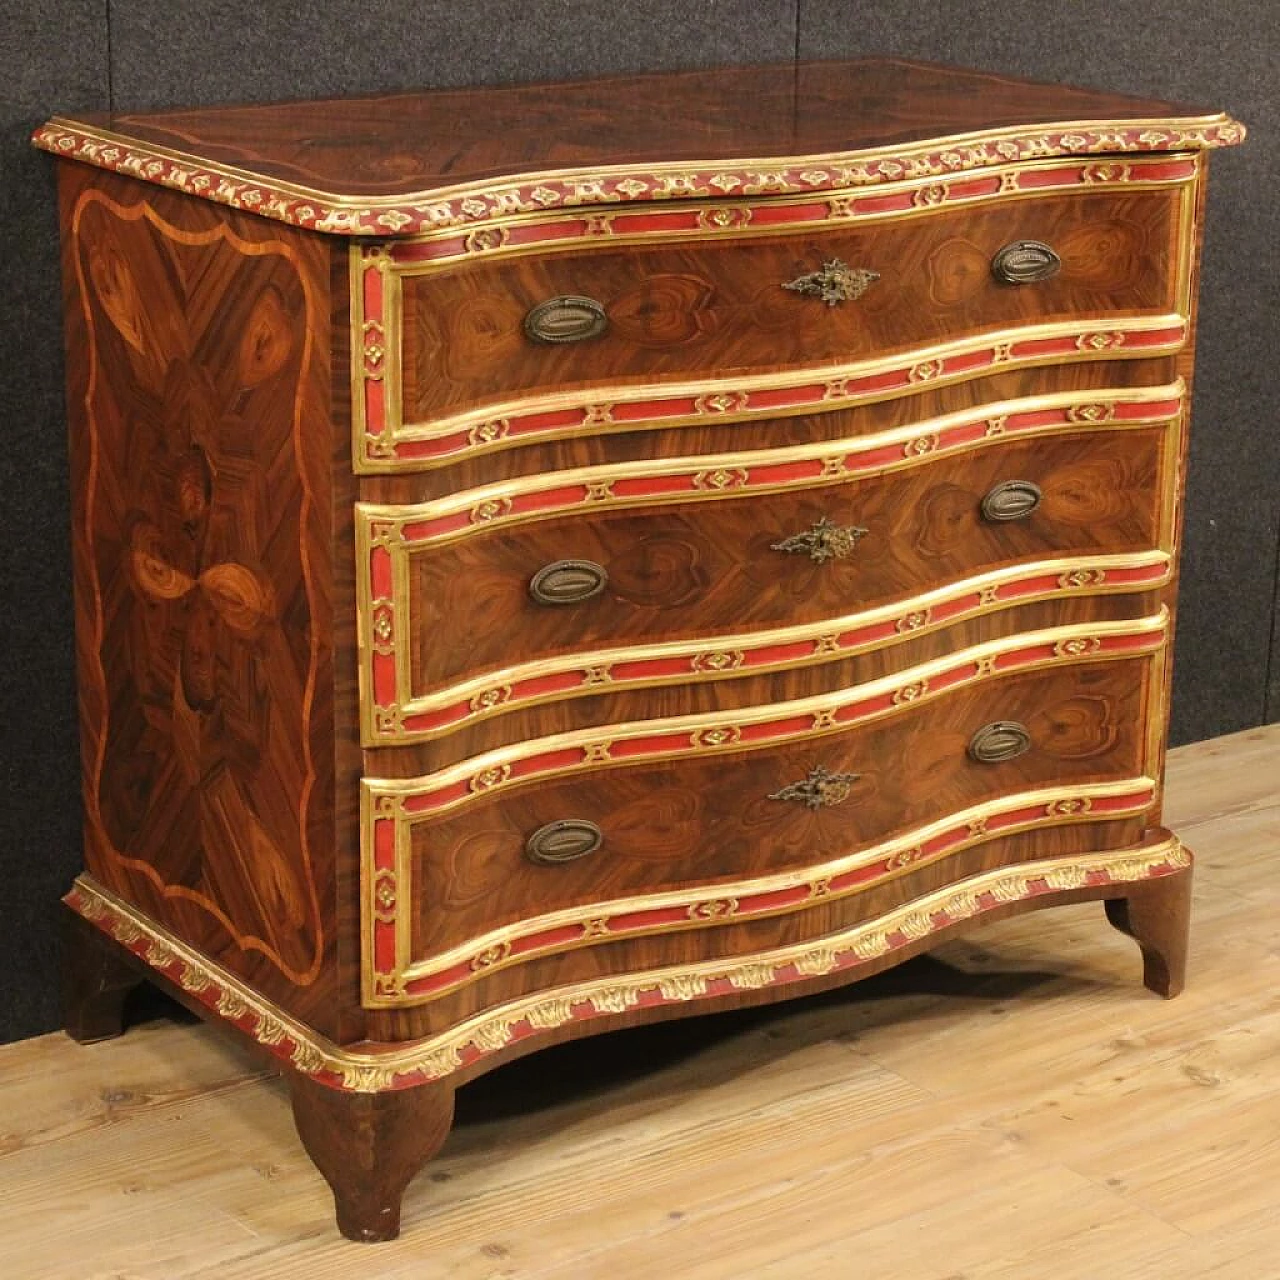 Genoese inlaid, lacquered and gilded wood dresser 1